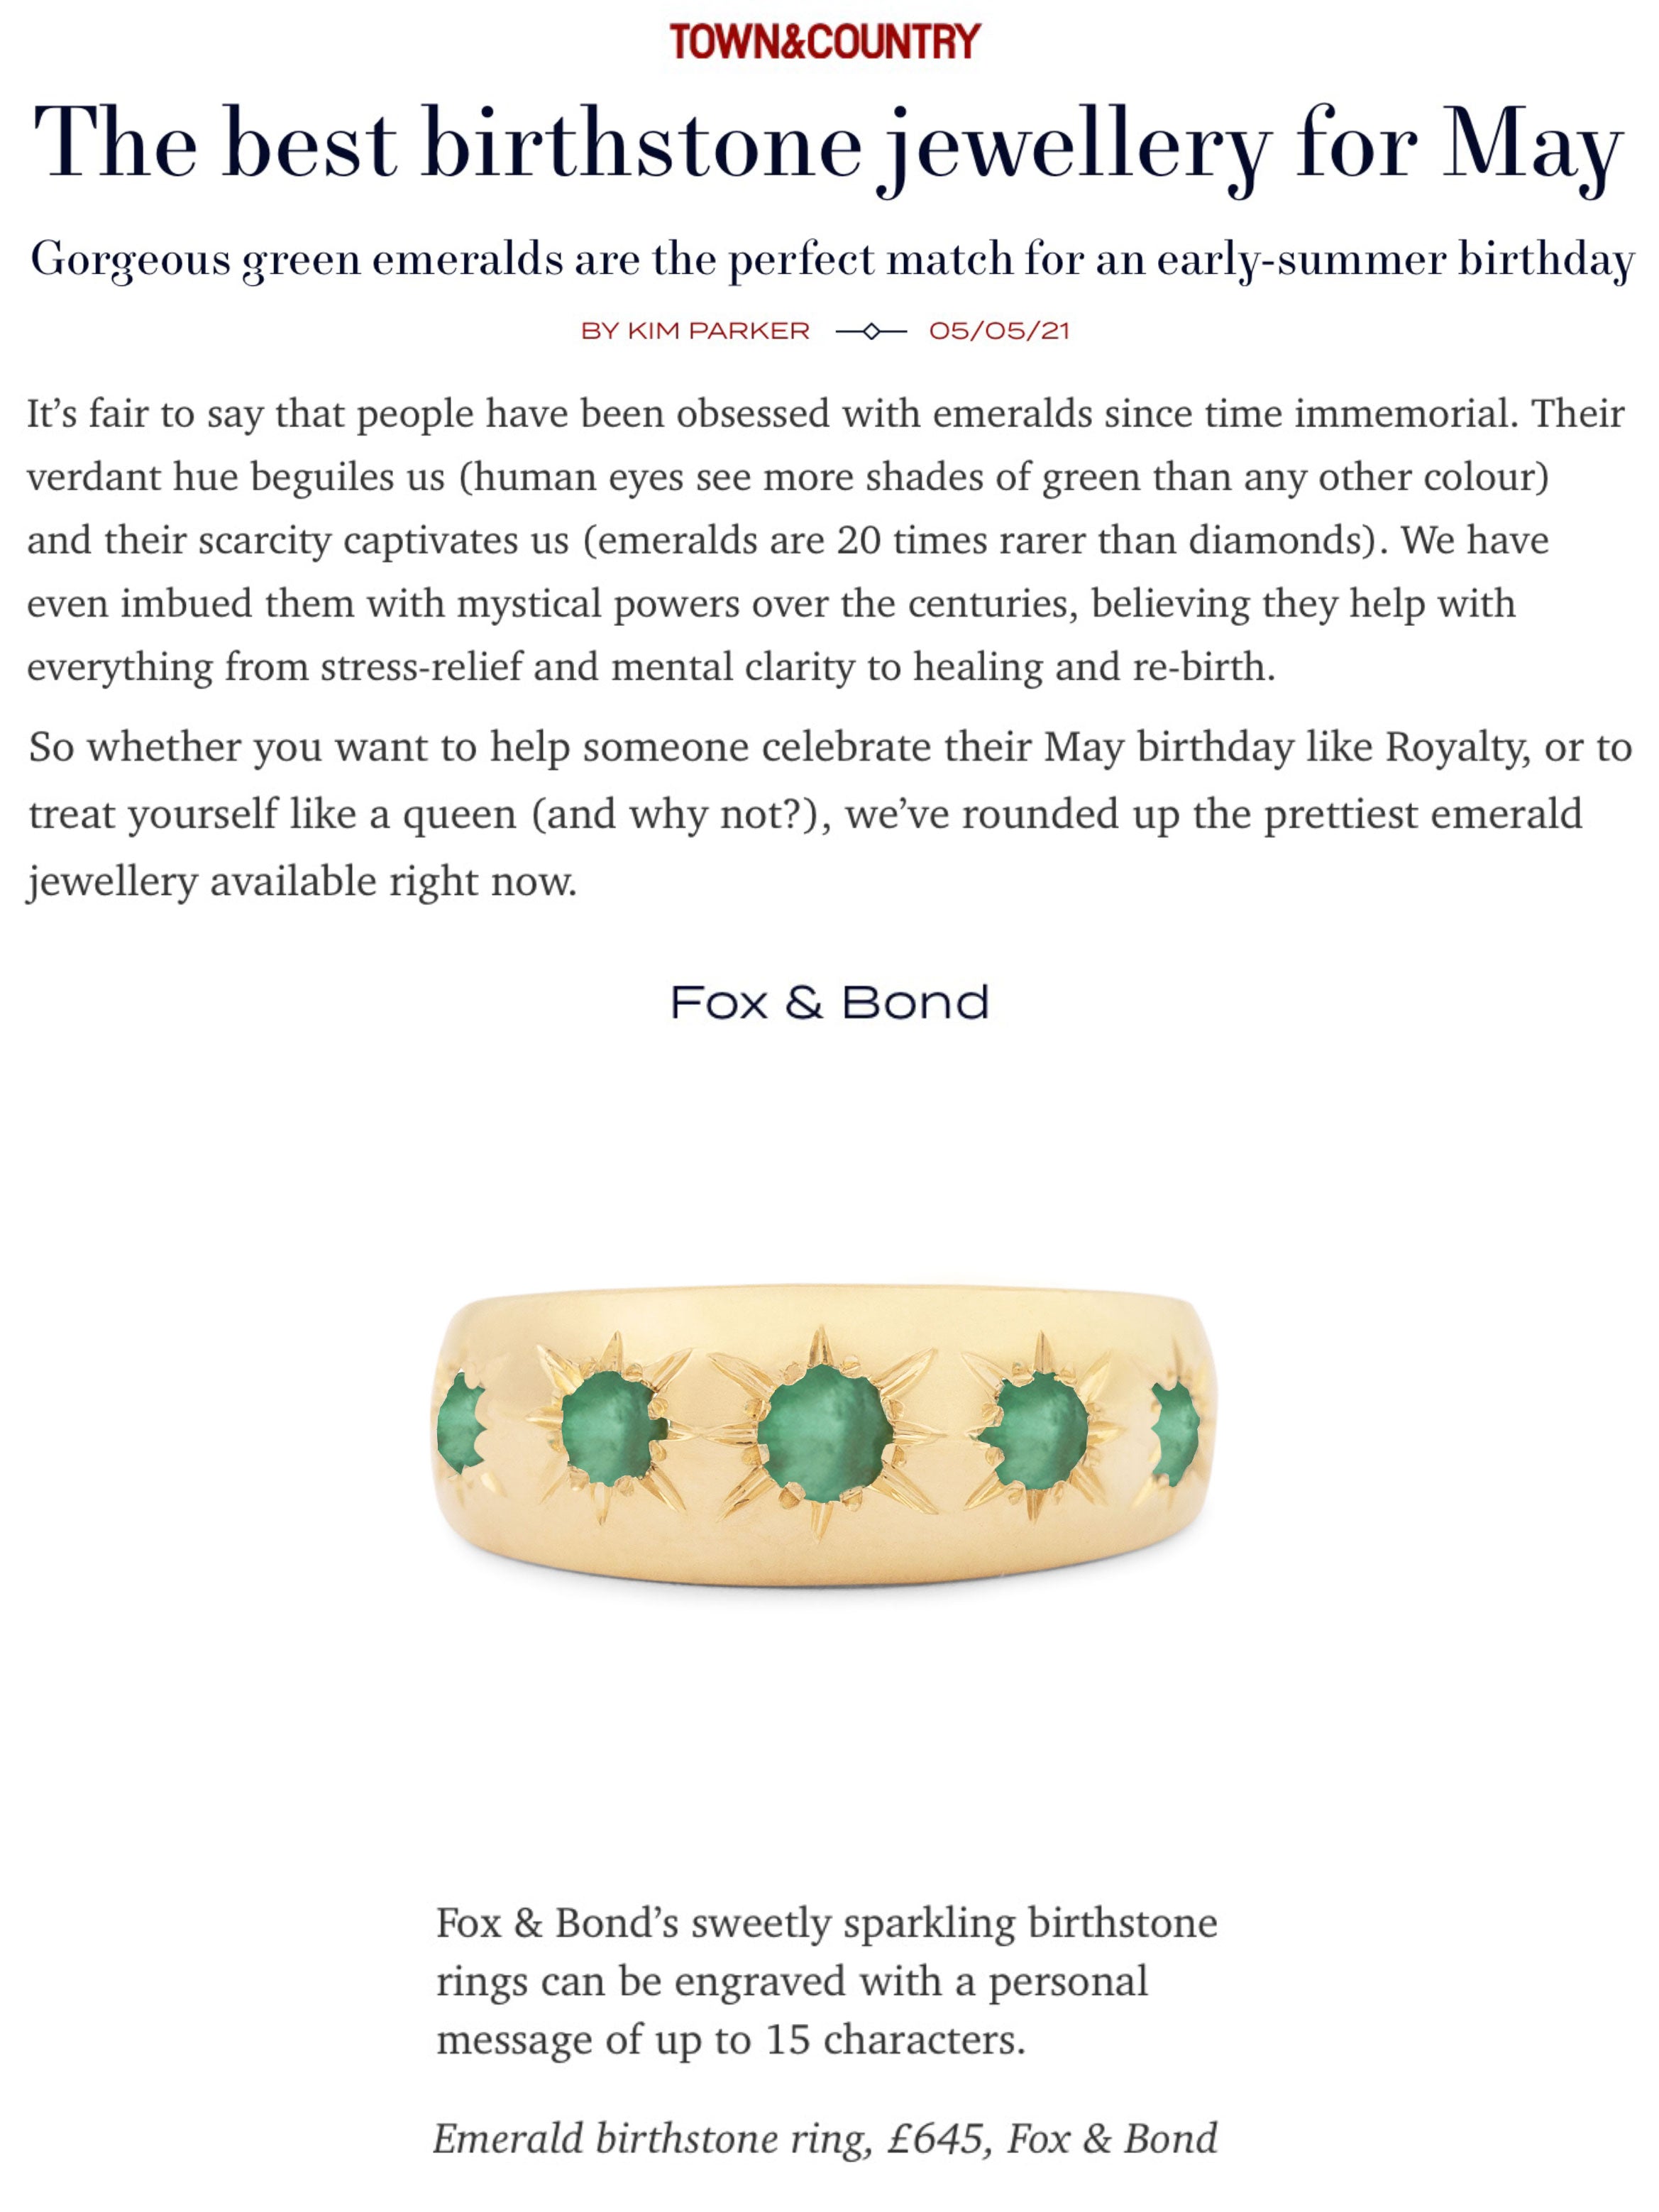 Town & Country UK: The best birthstone jewellery for May